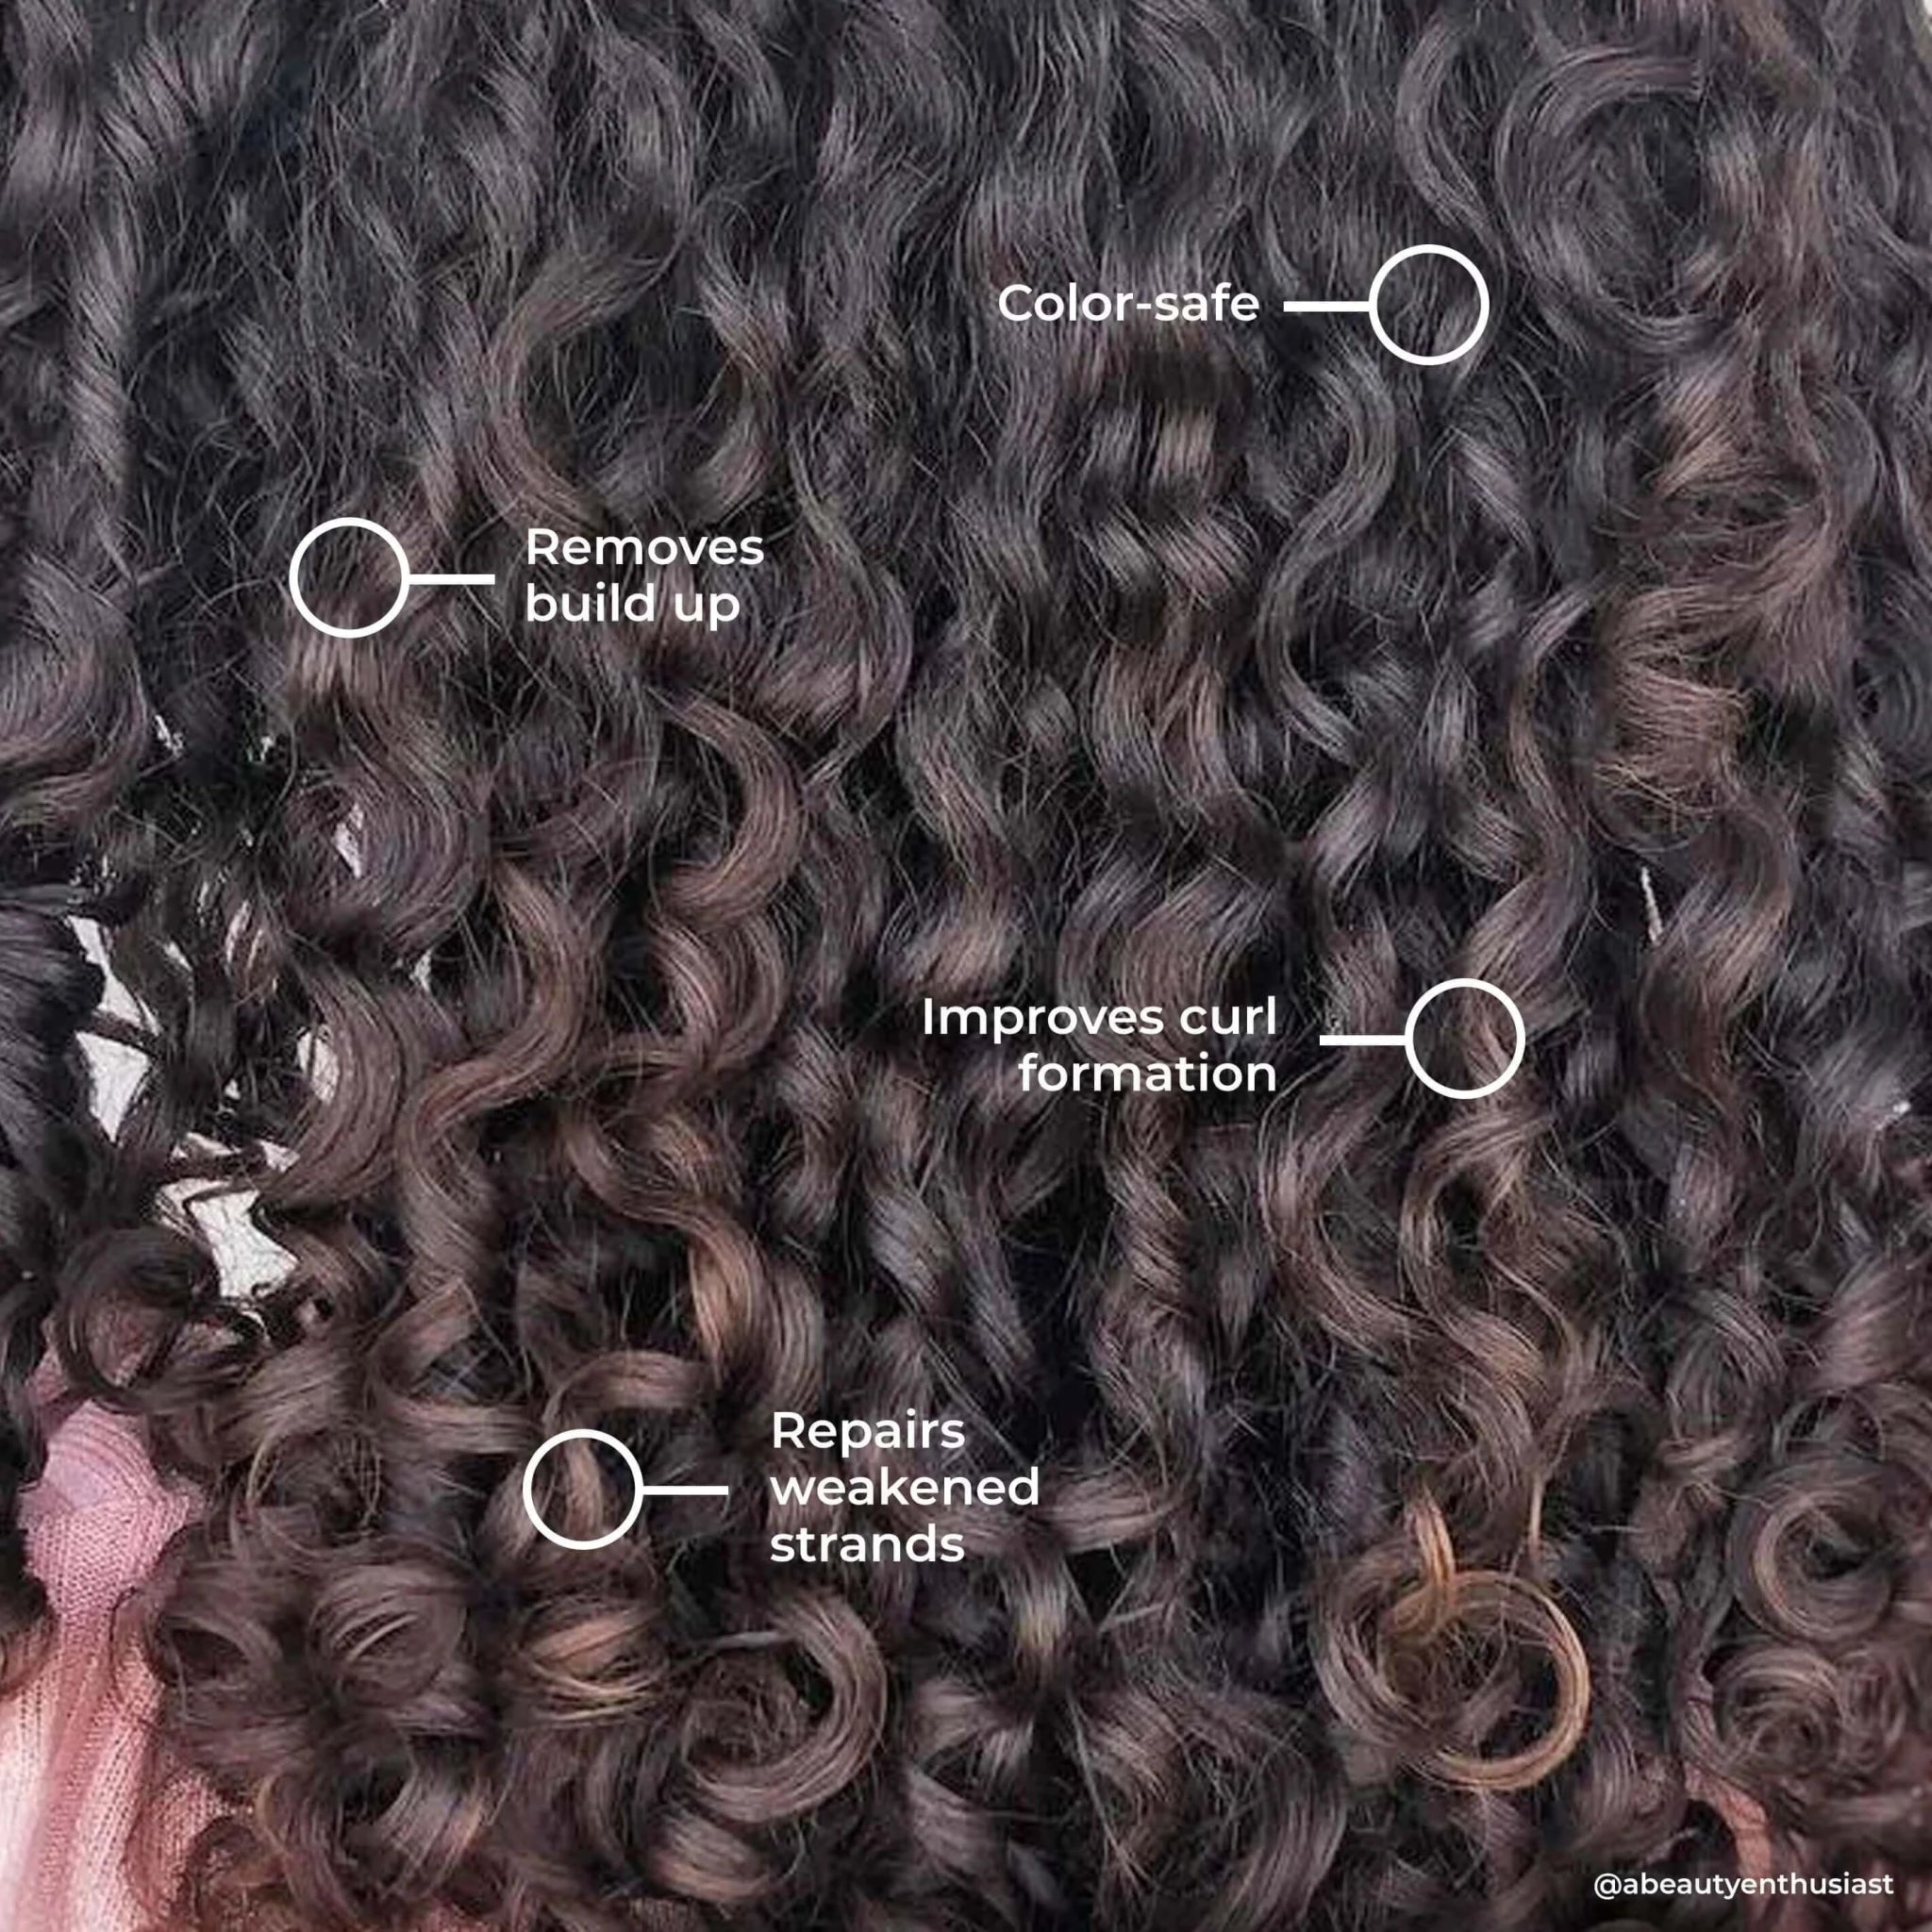 Close-up of curly hair showcasing the benefits of Leaf and Flower Instant Curl Repair Shampoo and Conditioner Duo: removing buildup, improving curl formation, and repairing weakened strands; product is color-safe.